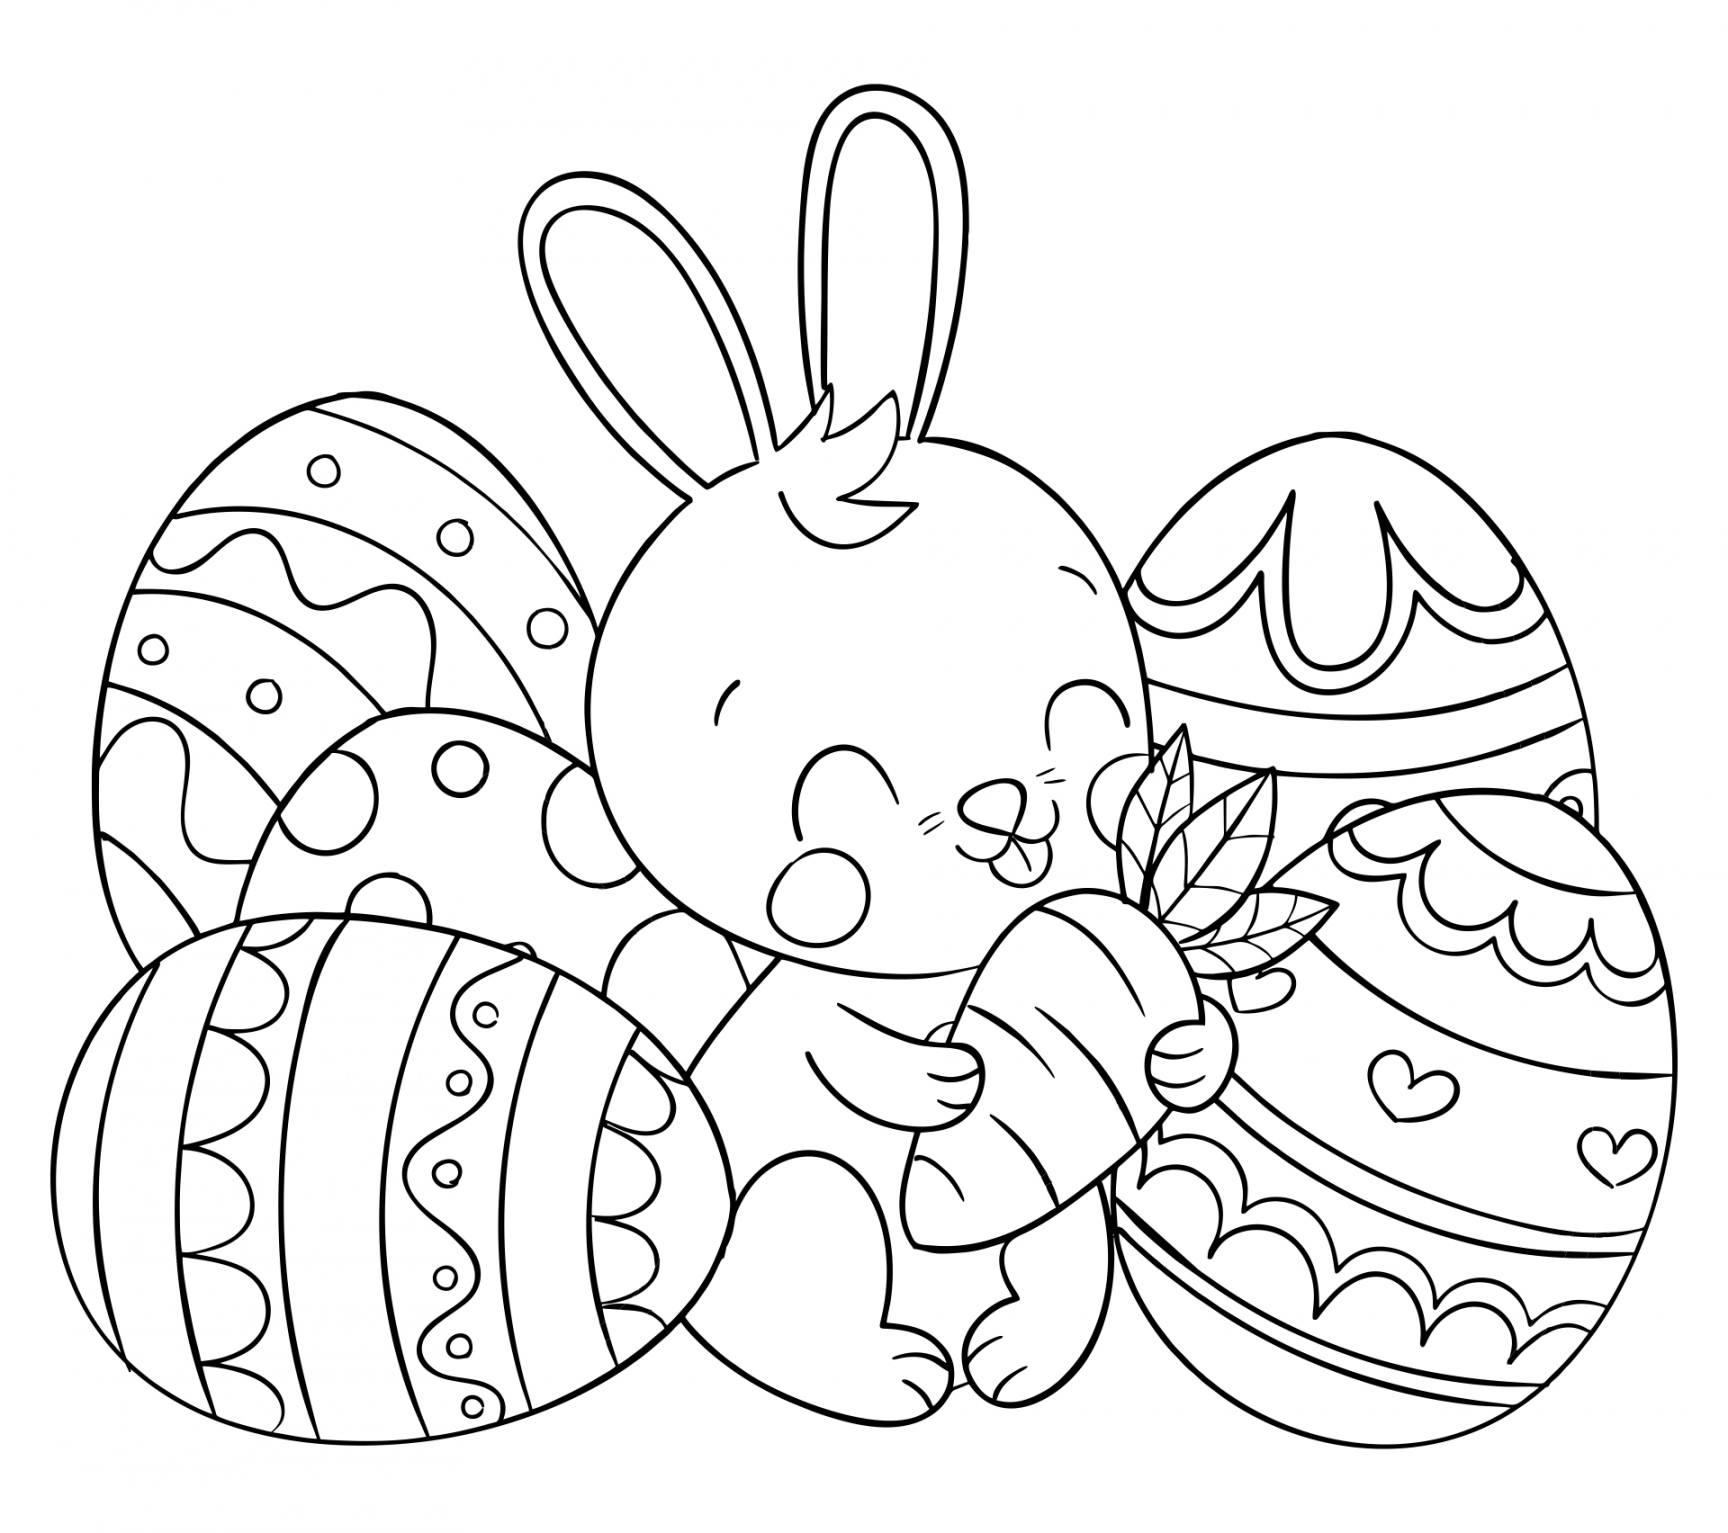 Free Easter Coloring Pages Printable - Printable -  Best Free Printable Easter Egg Coloring Page - printablee